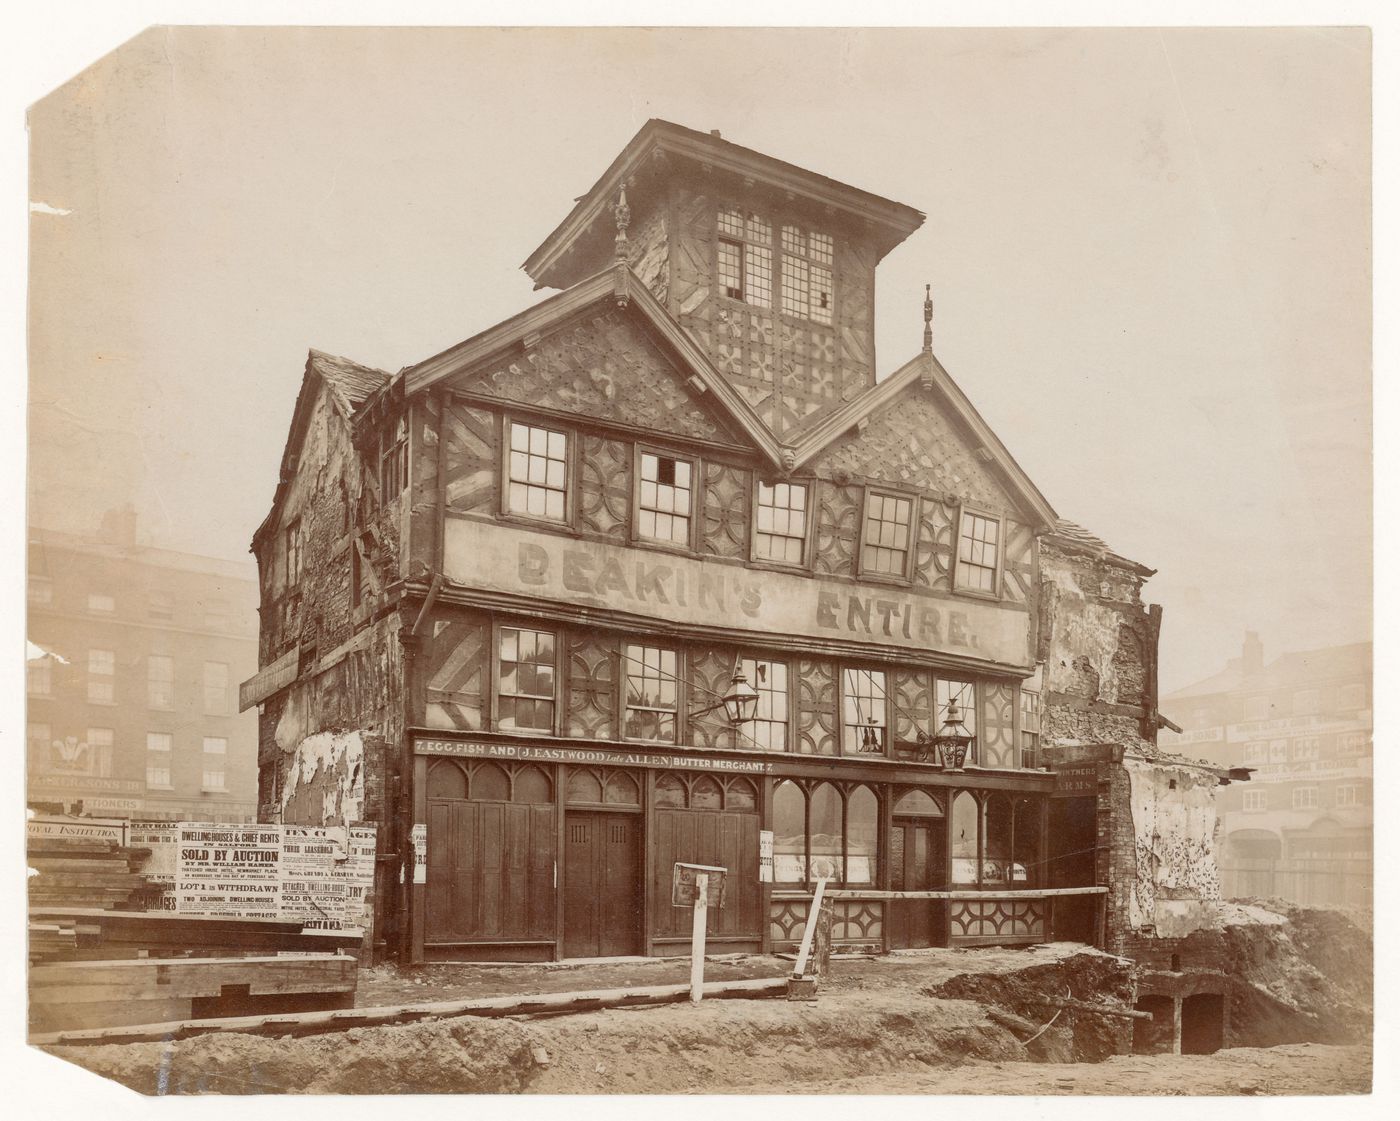 View of the Vintner's Arms, a public house, prior to its demolition in 1876, Manchester, England